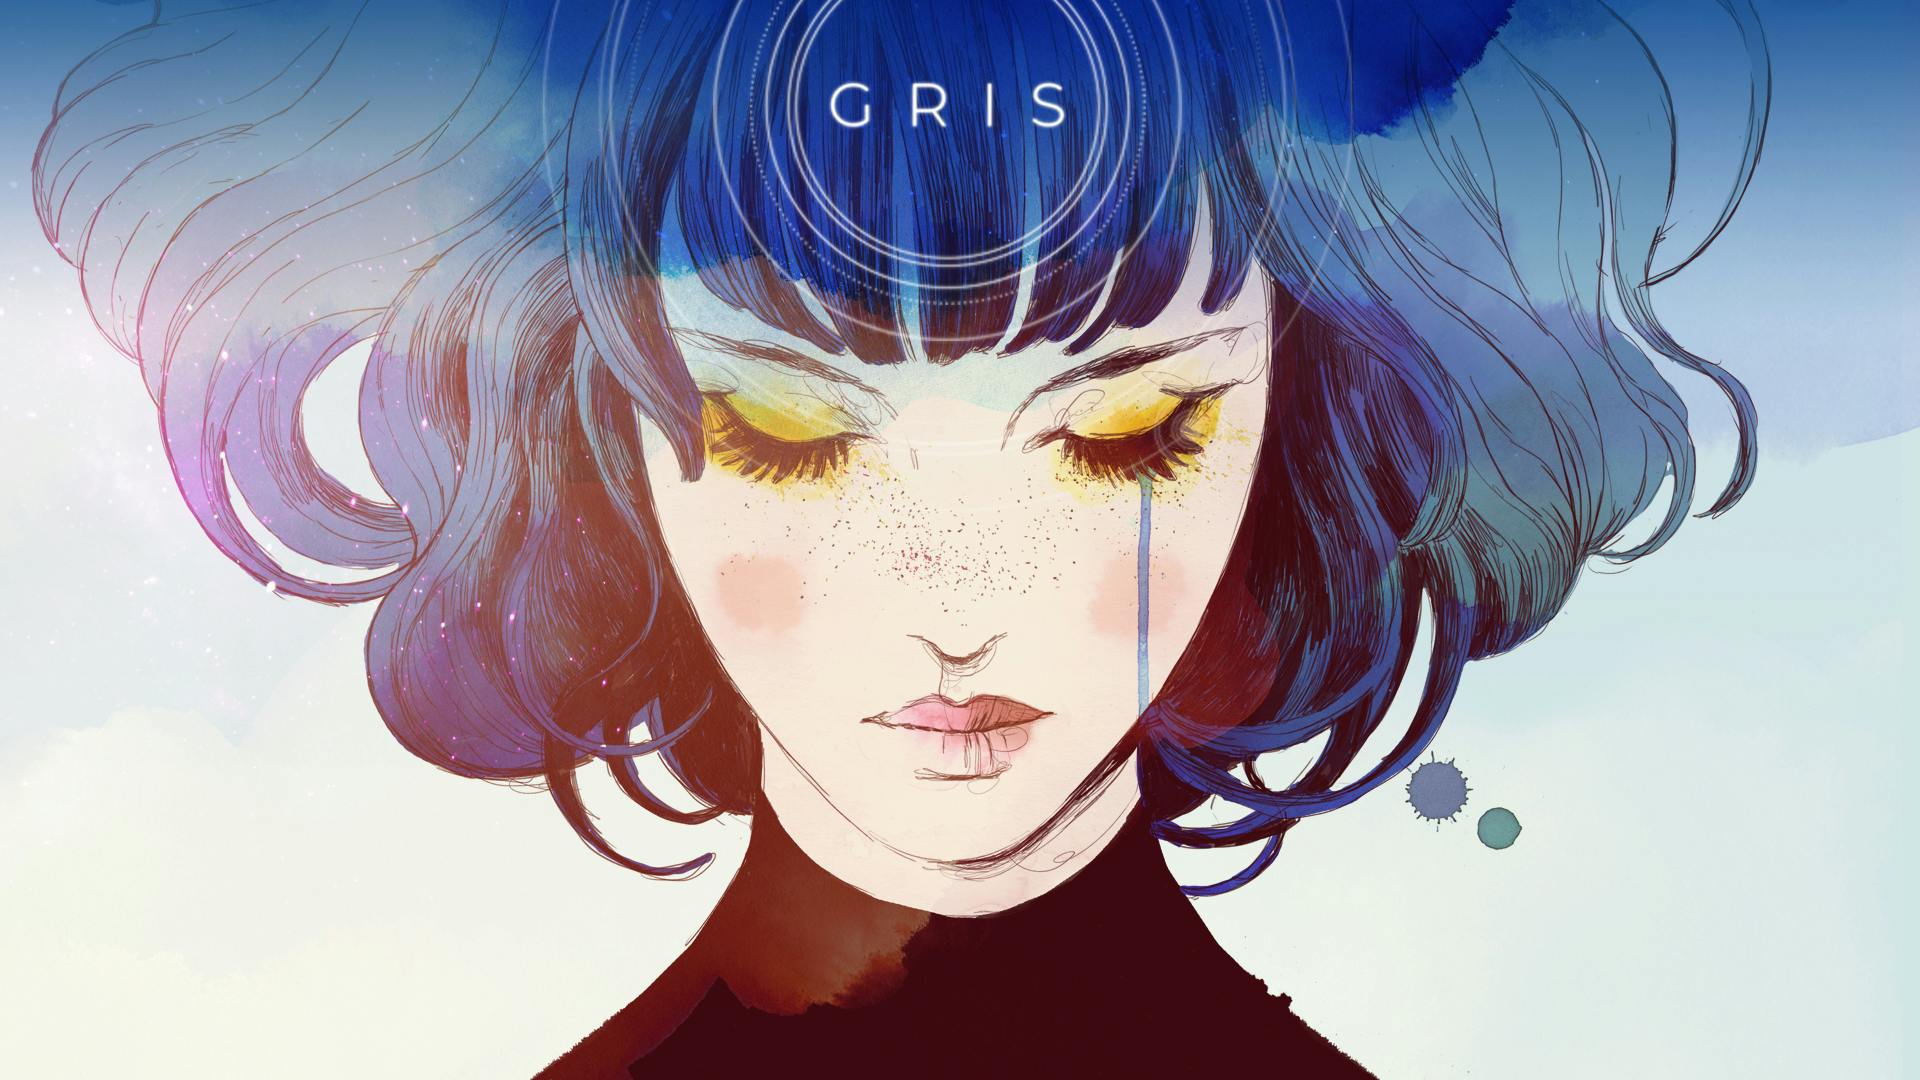 Key art created for the video game GRIS showing the face of the main character, a girl named Gris.